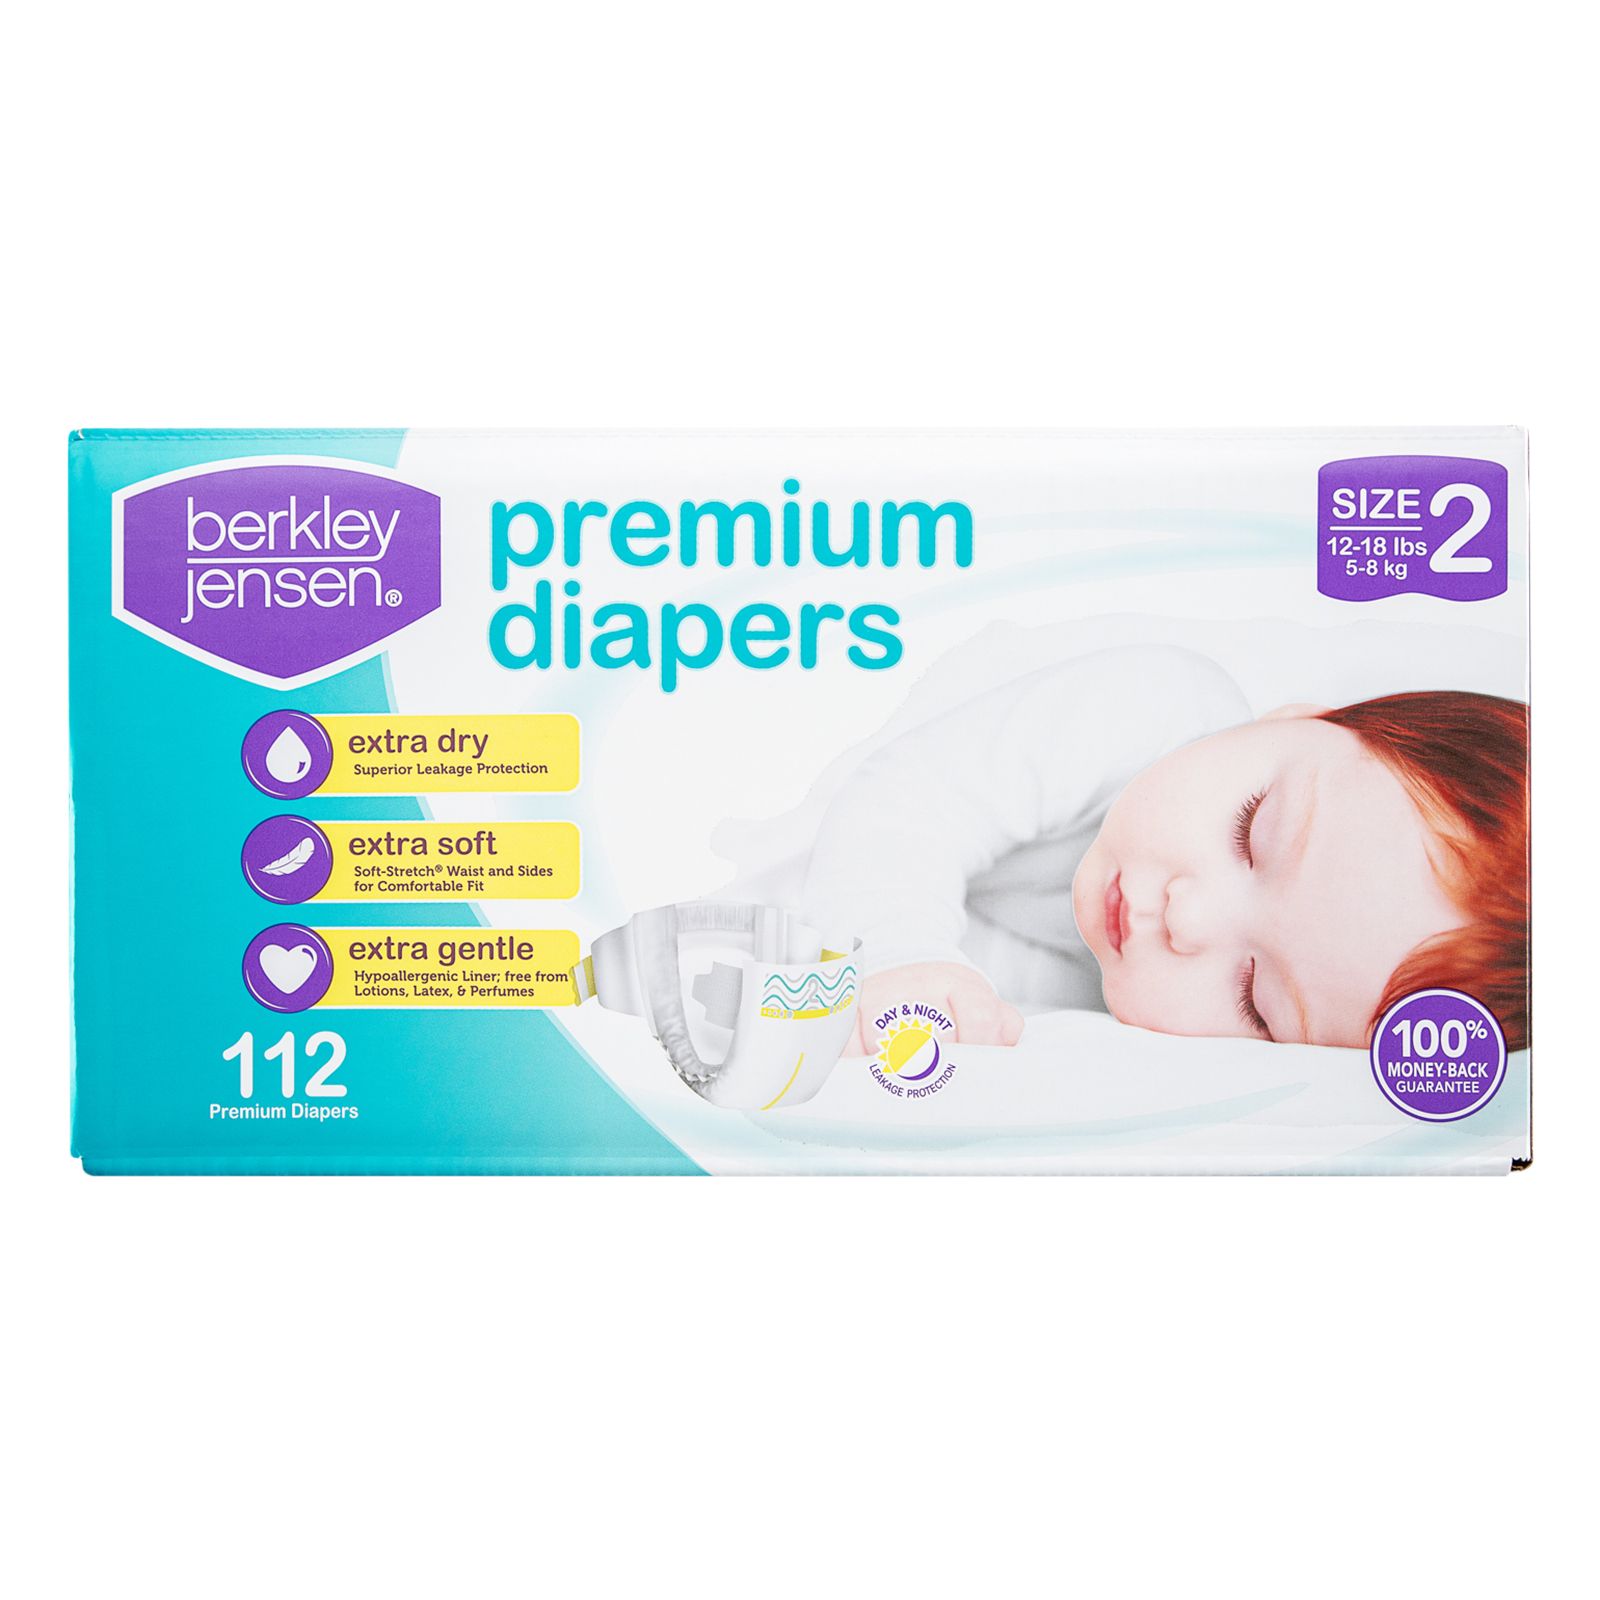 Parent's Choice Diapers Giant Pack - Today's Parent